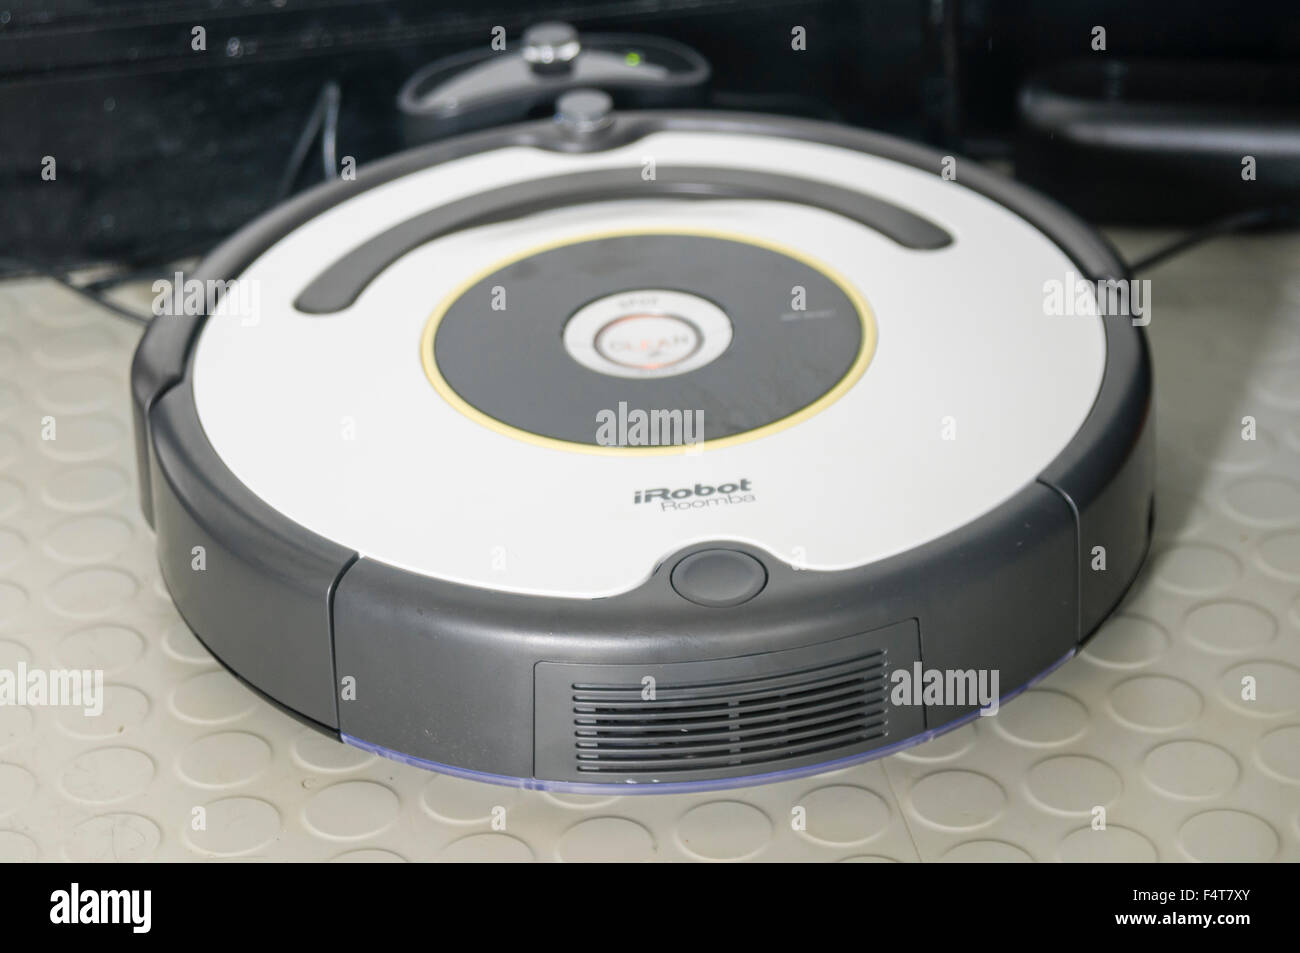 An iRobot Roomba robotic vacuum cleaner in its docking station Stock Photo